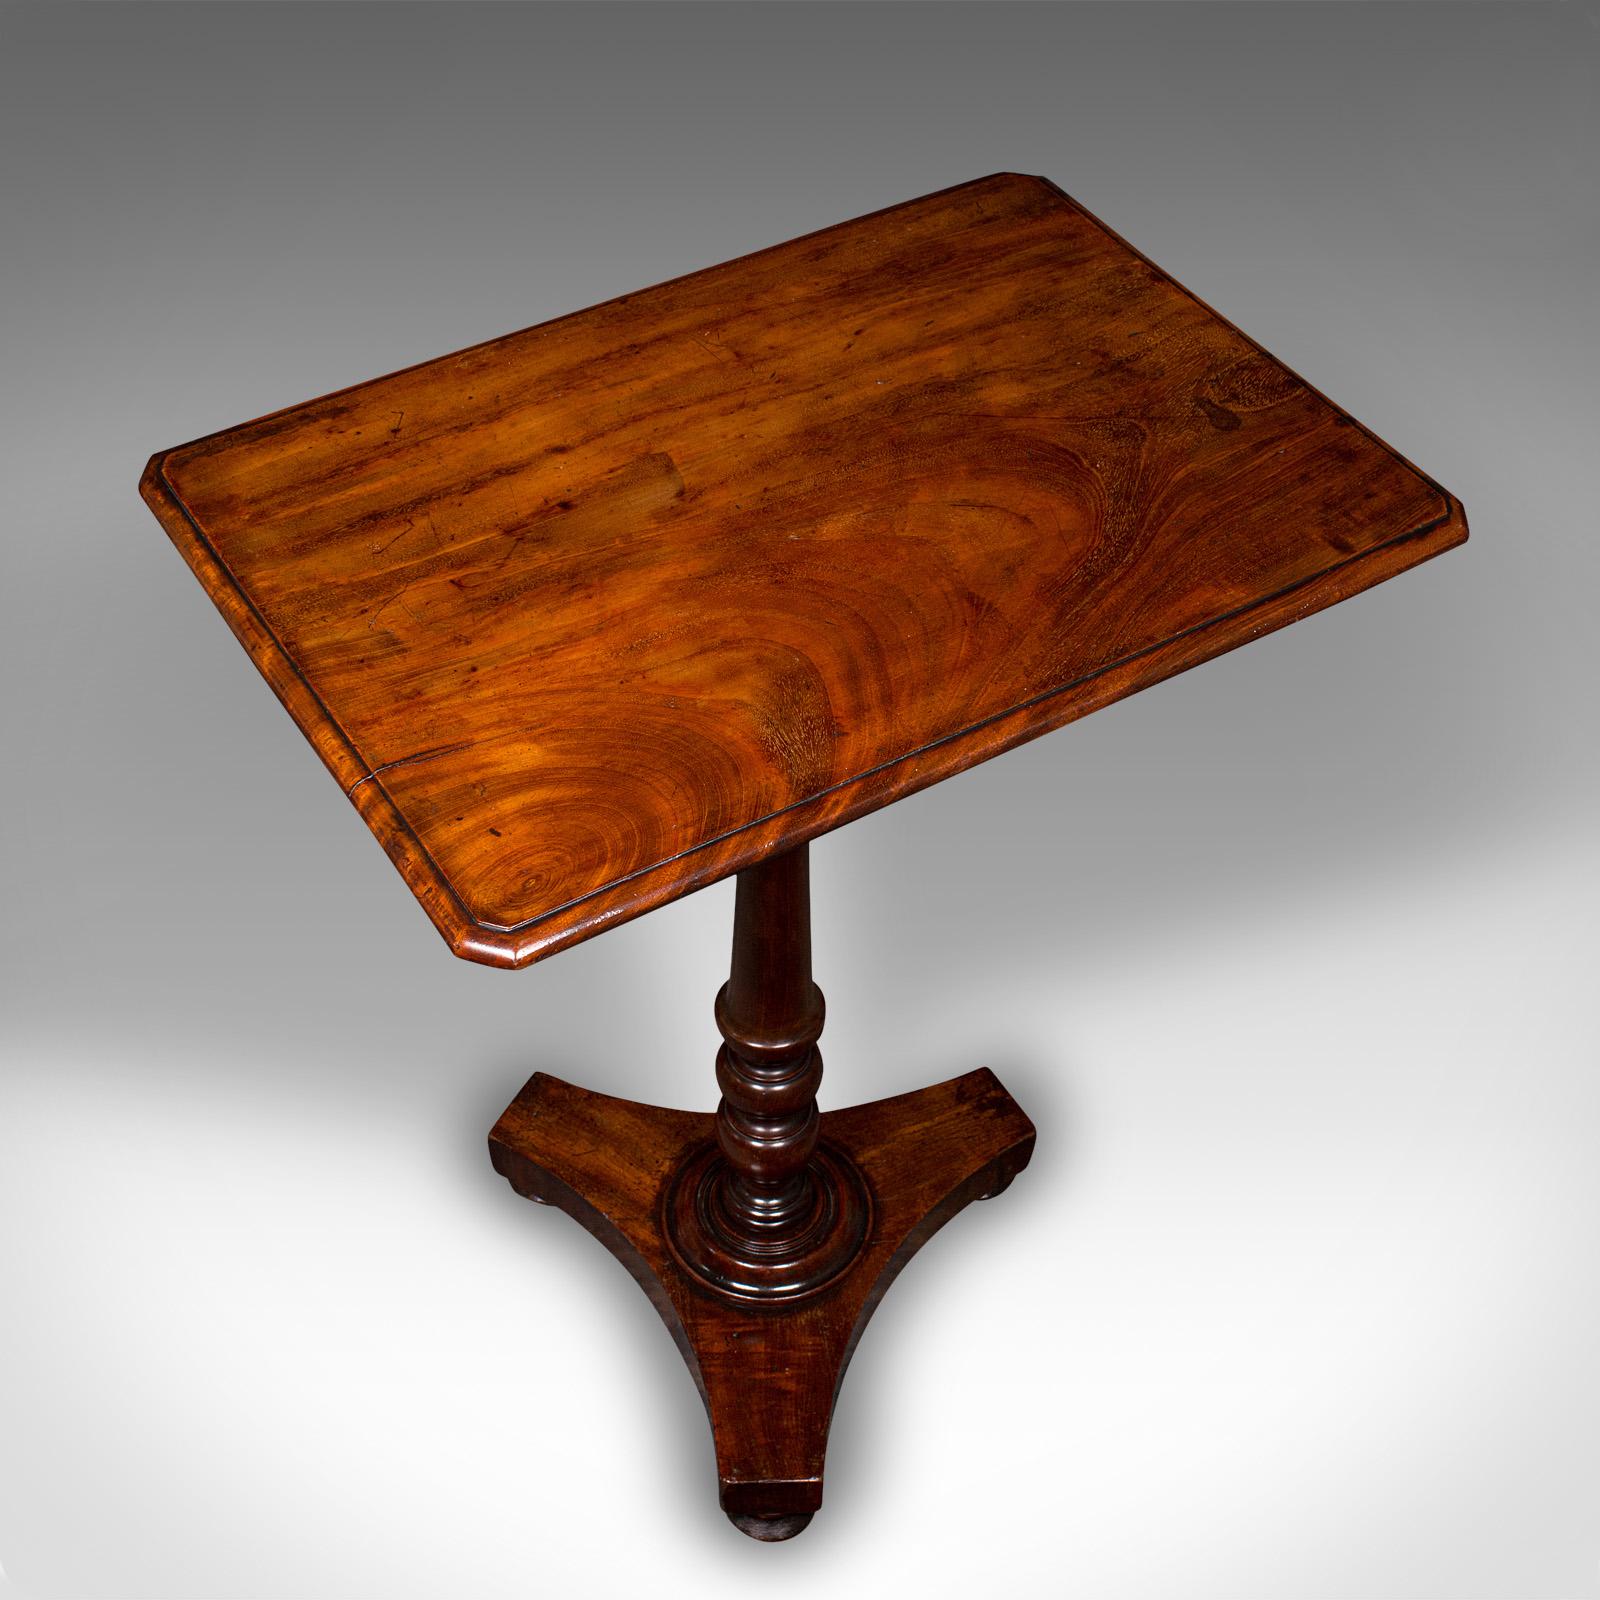 Antique Tilting Lamp Table, English, Flame, Occasional, Side, Regency circa 1820 For Sale 3